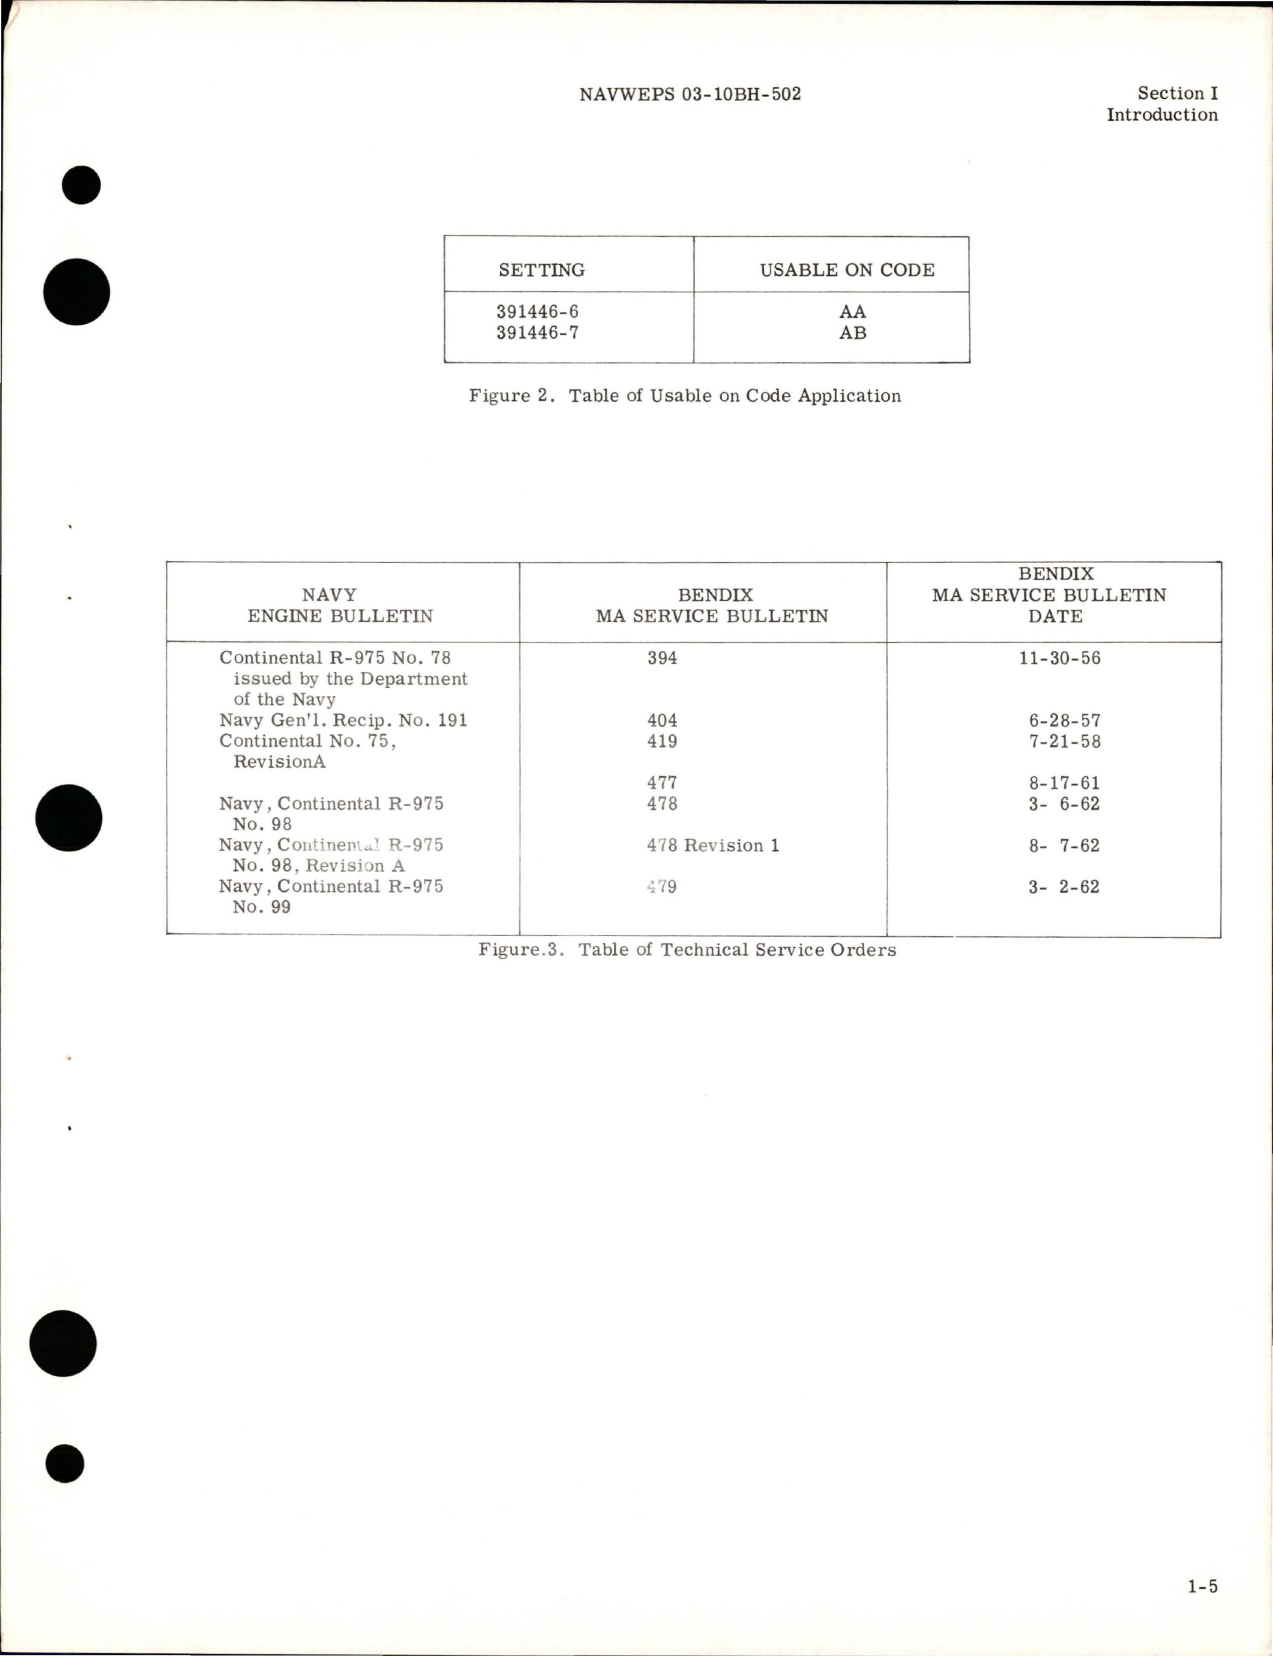 Sample page 9 from AirCorps Library document: Illustrated Parts Breakdown for Injection Carburetor - Model QD-9D1, Parts 391446-6, and 391446-7